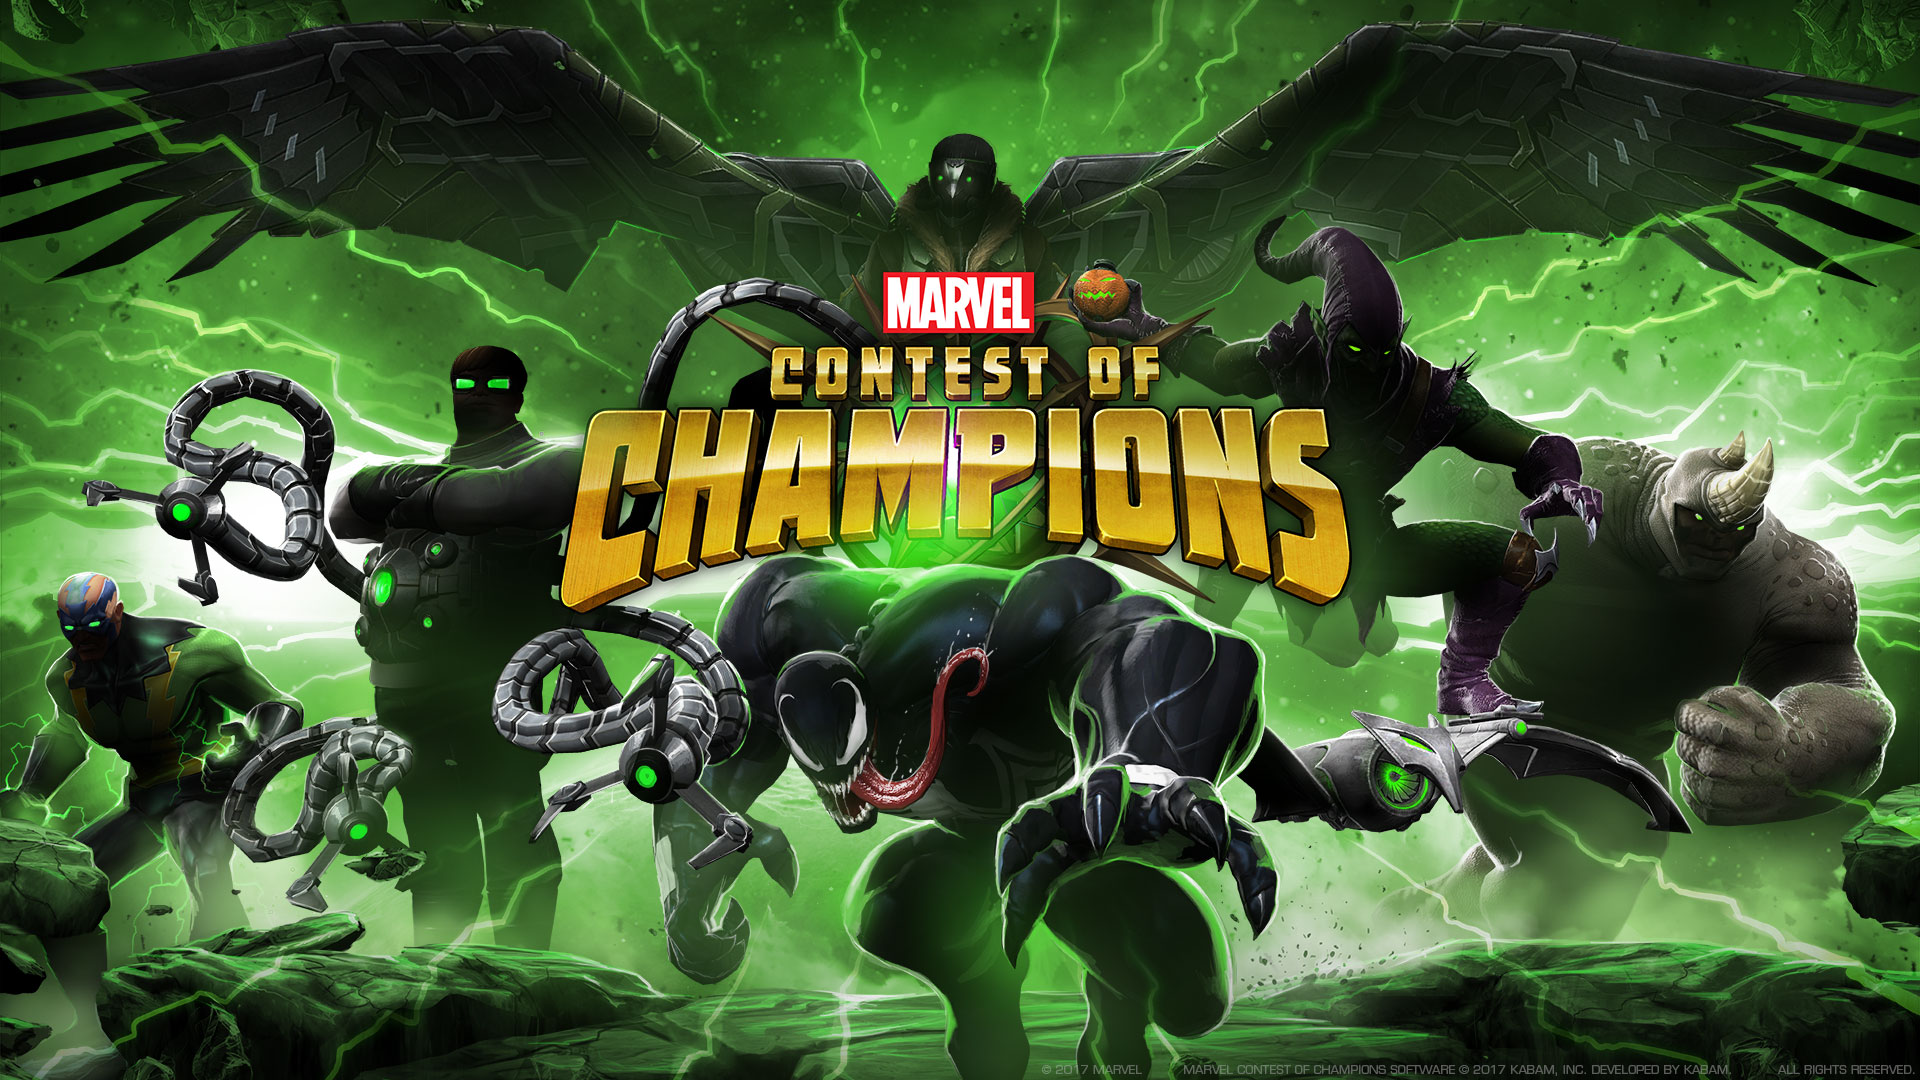 Here, have a Sinister Foes HD desktop background.: ContestOfChampions